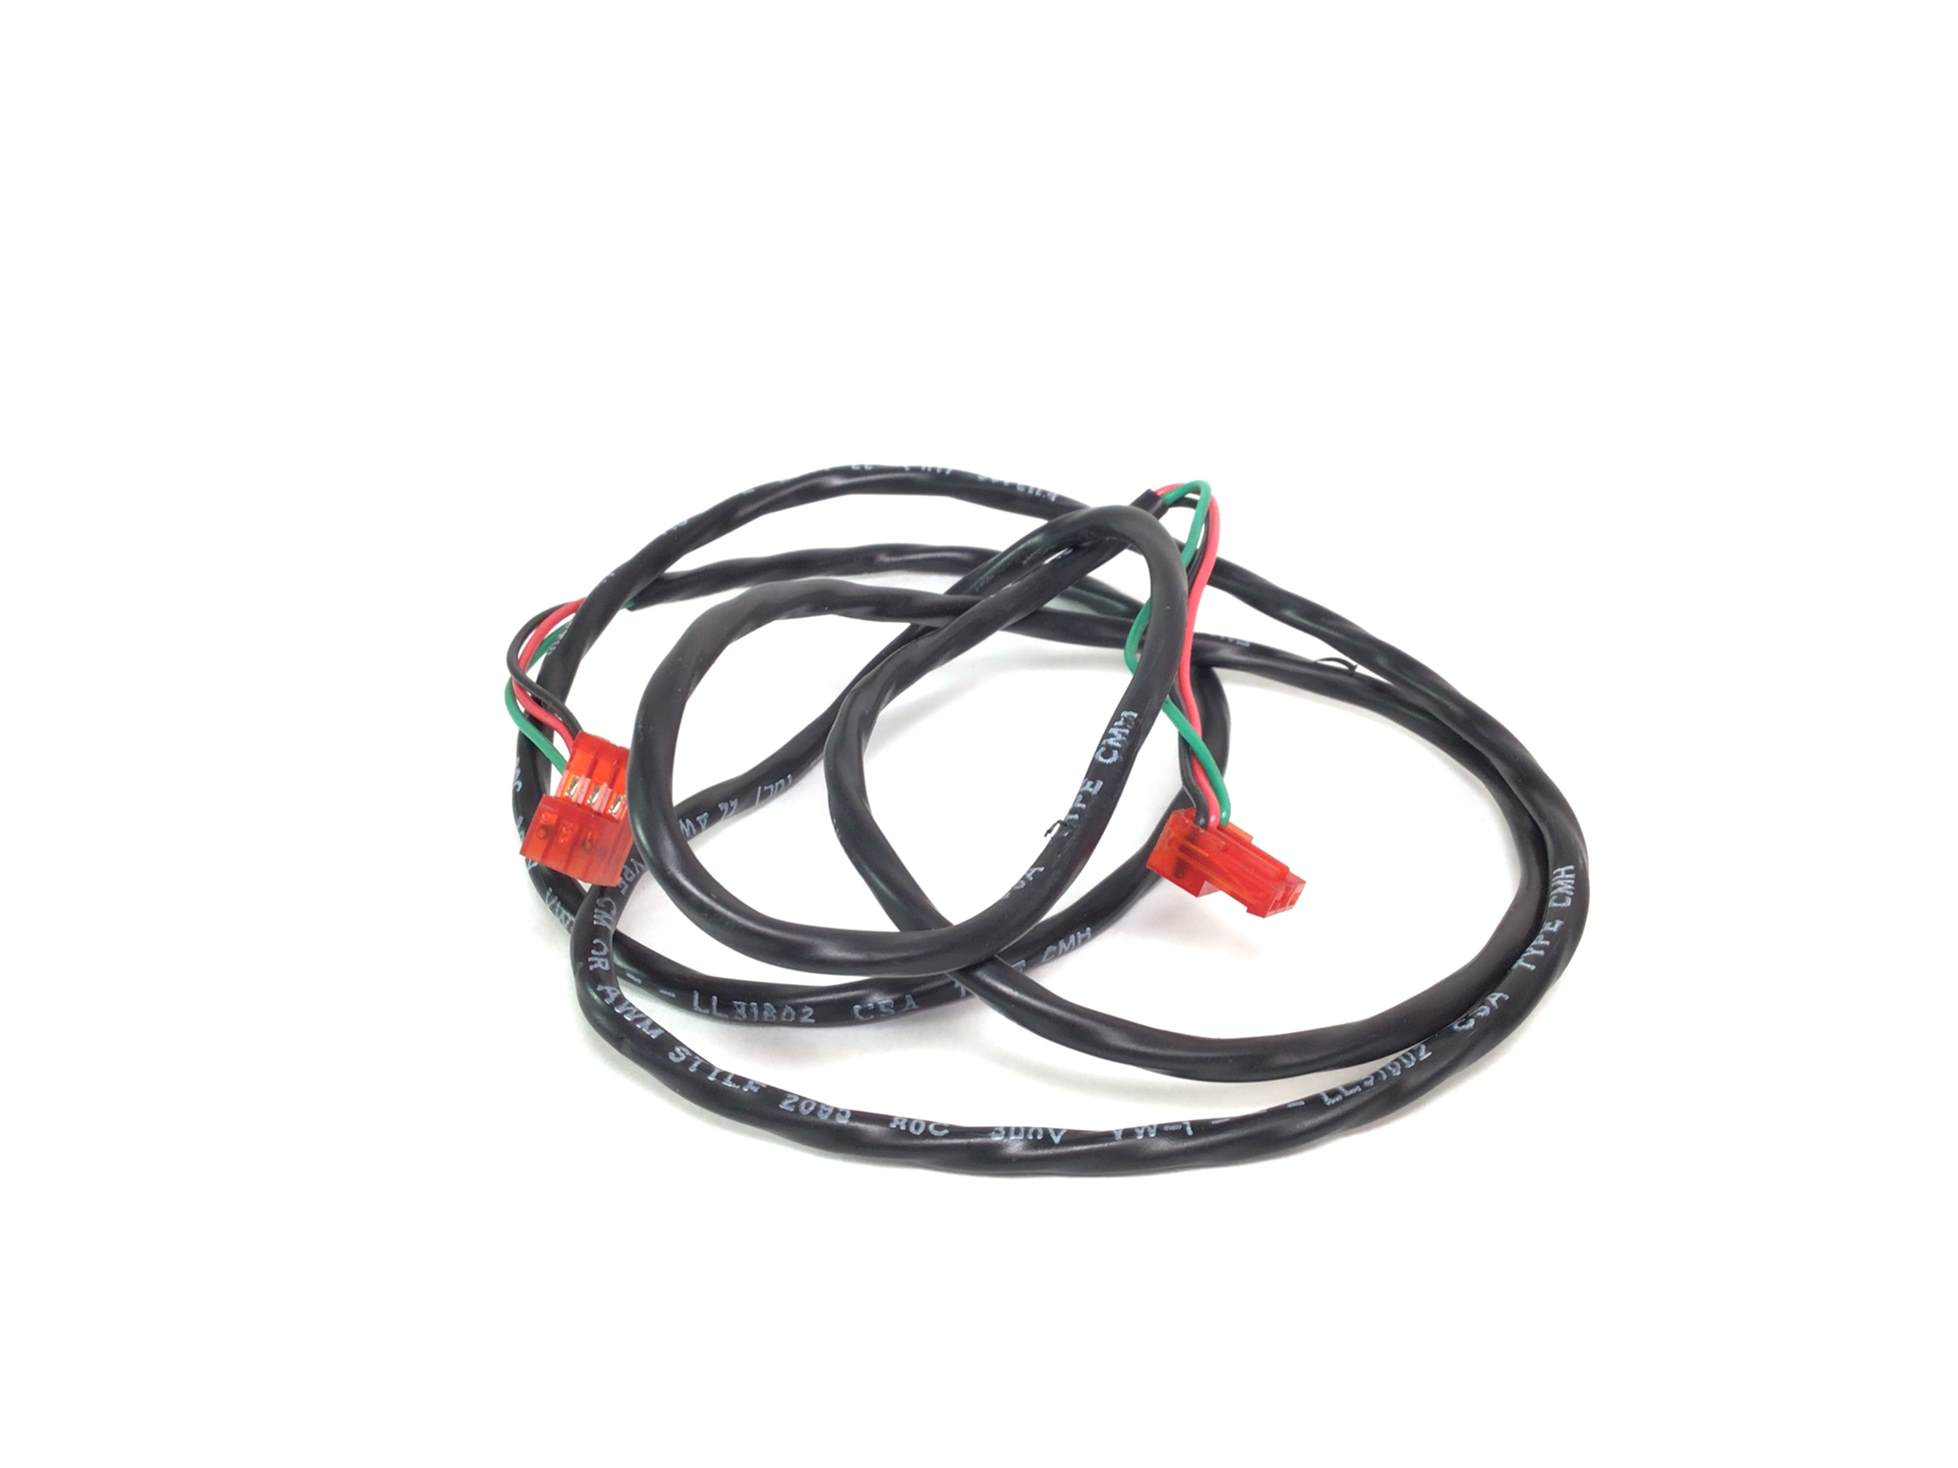 red green black 3 pin wire harness (Used)